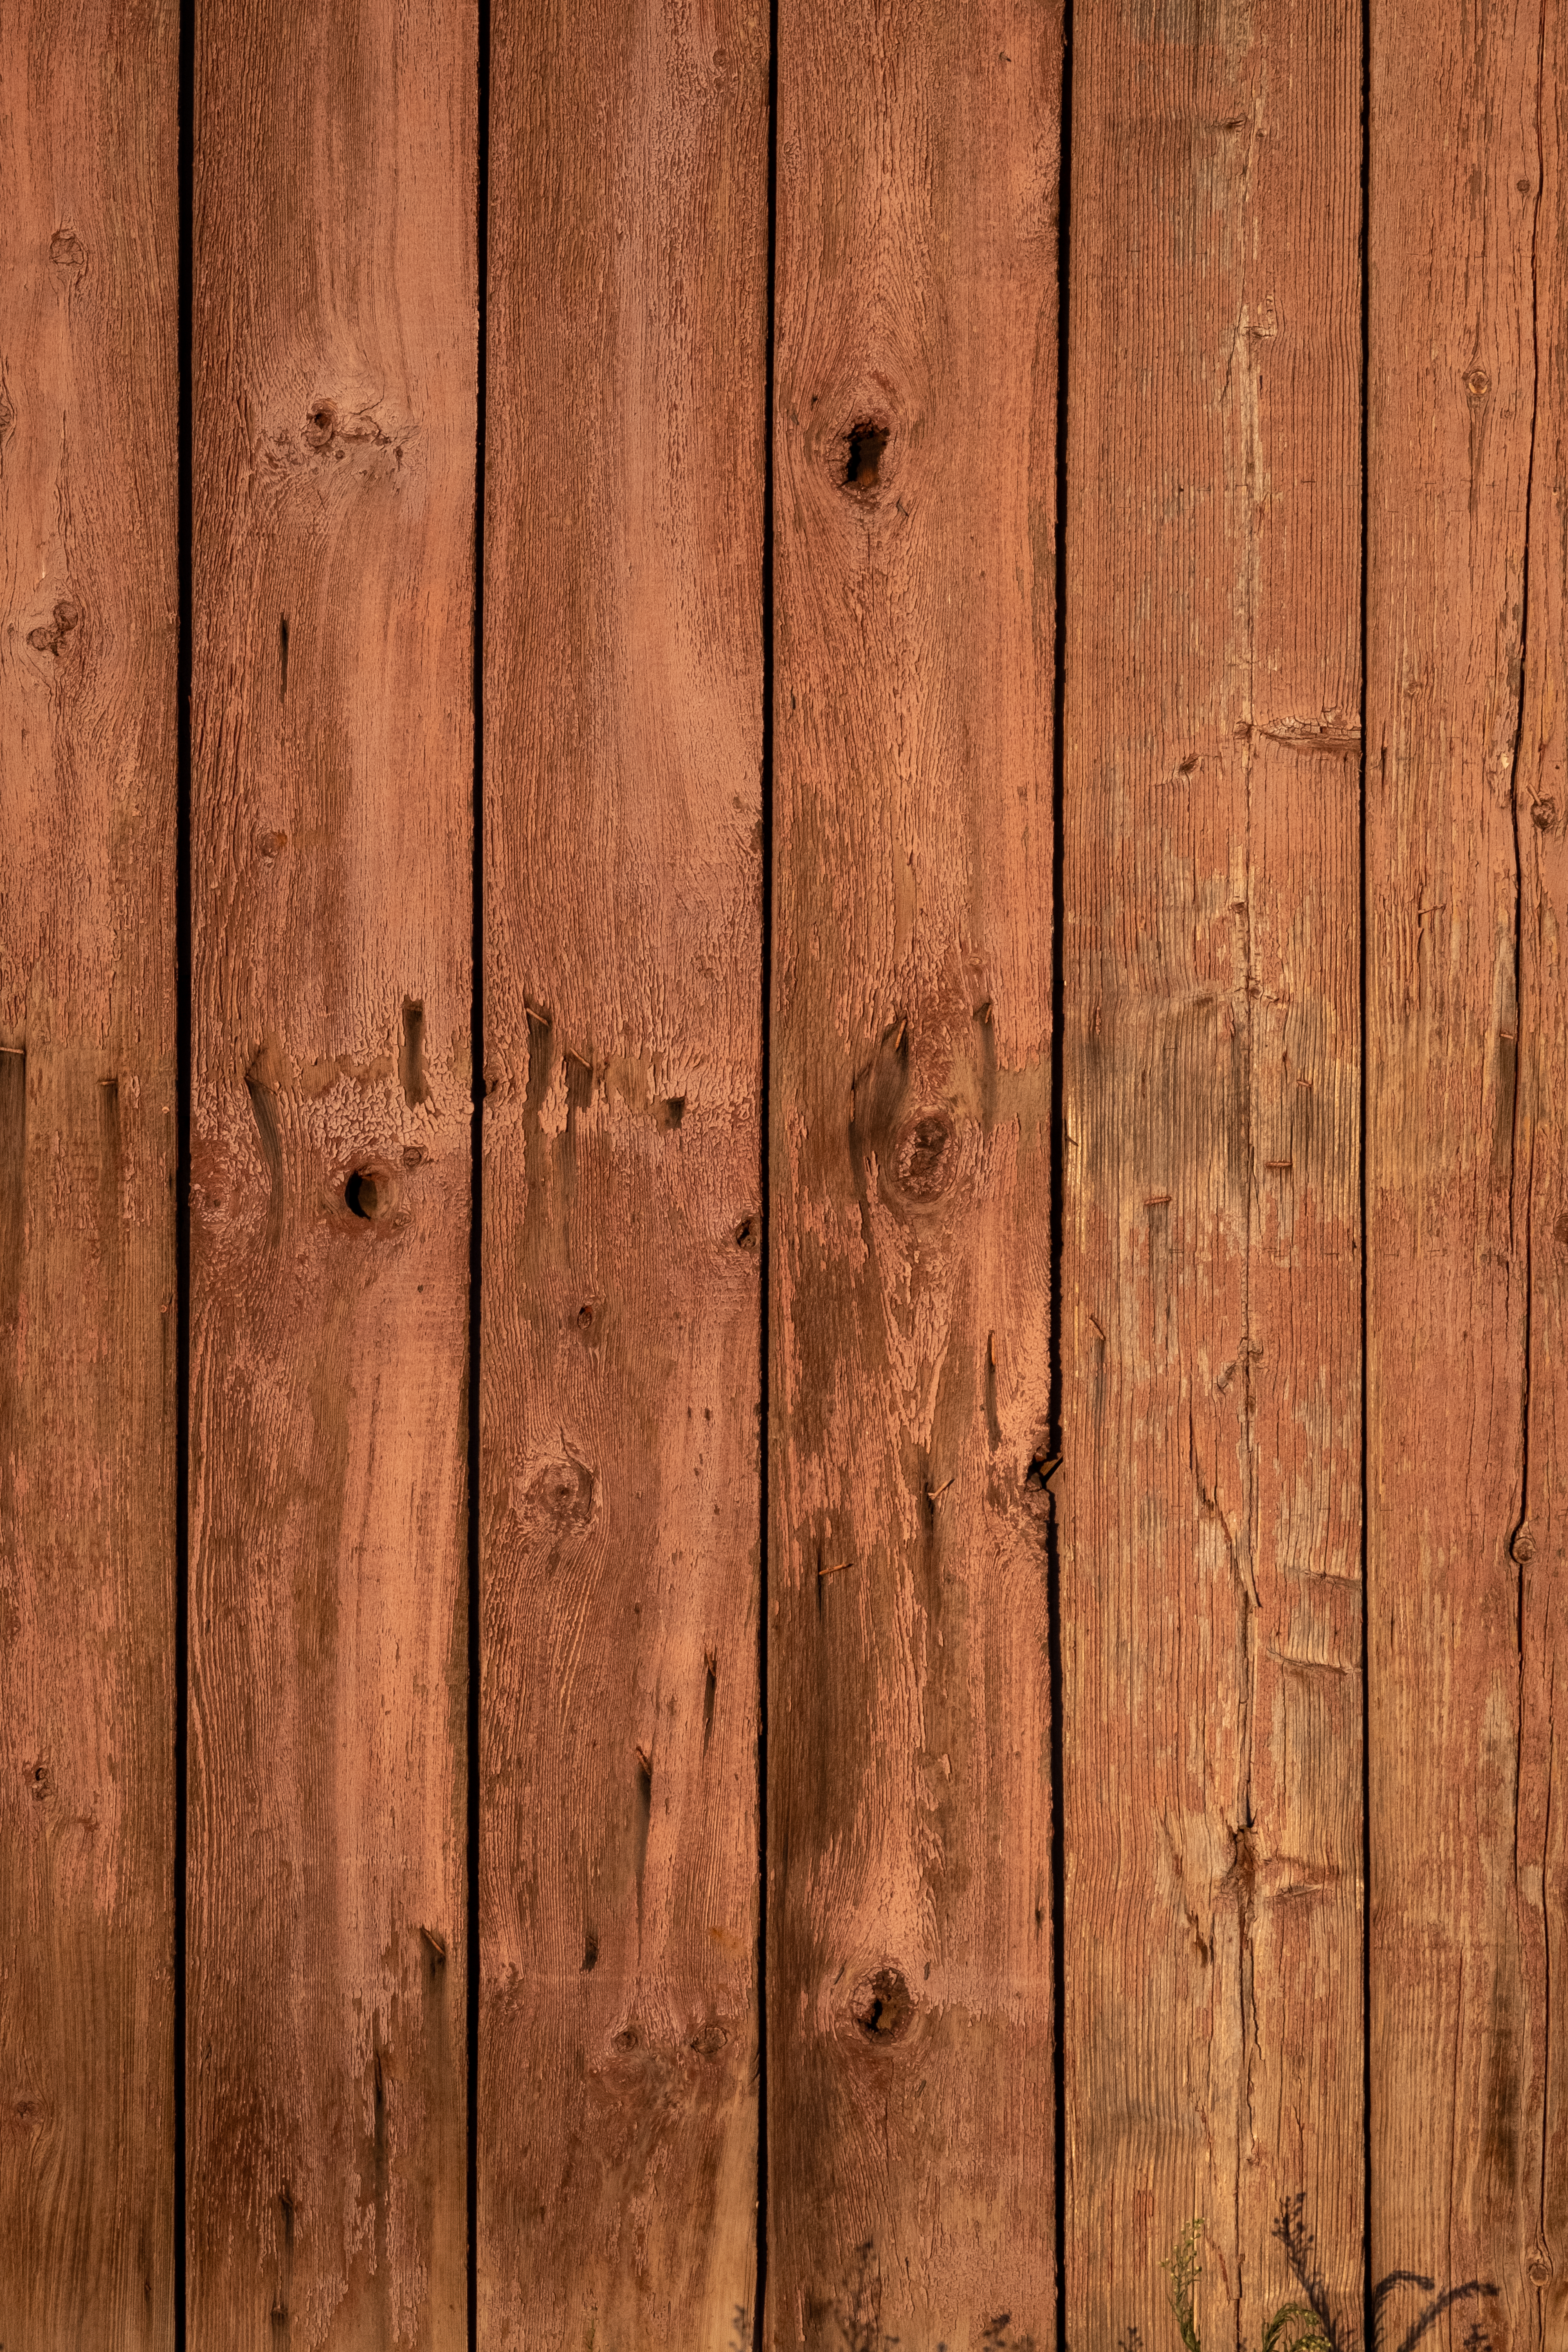 wooden, paint, planks, wood, texture, textures, brown, surface, board